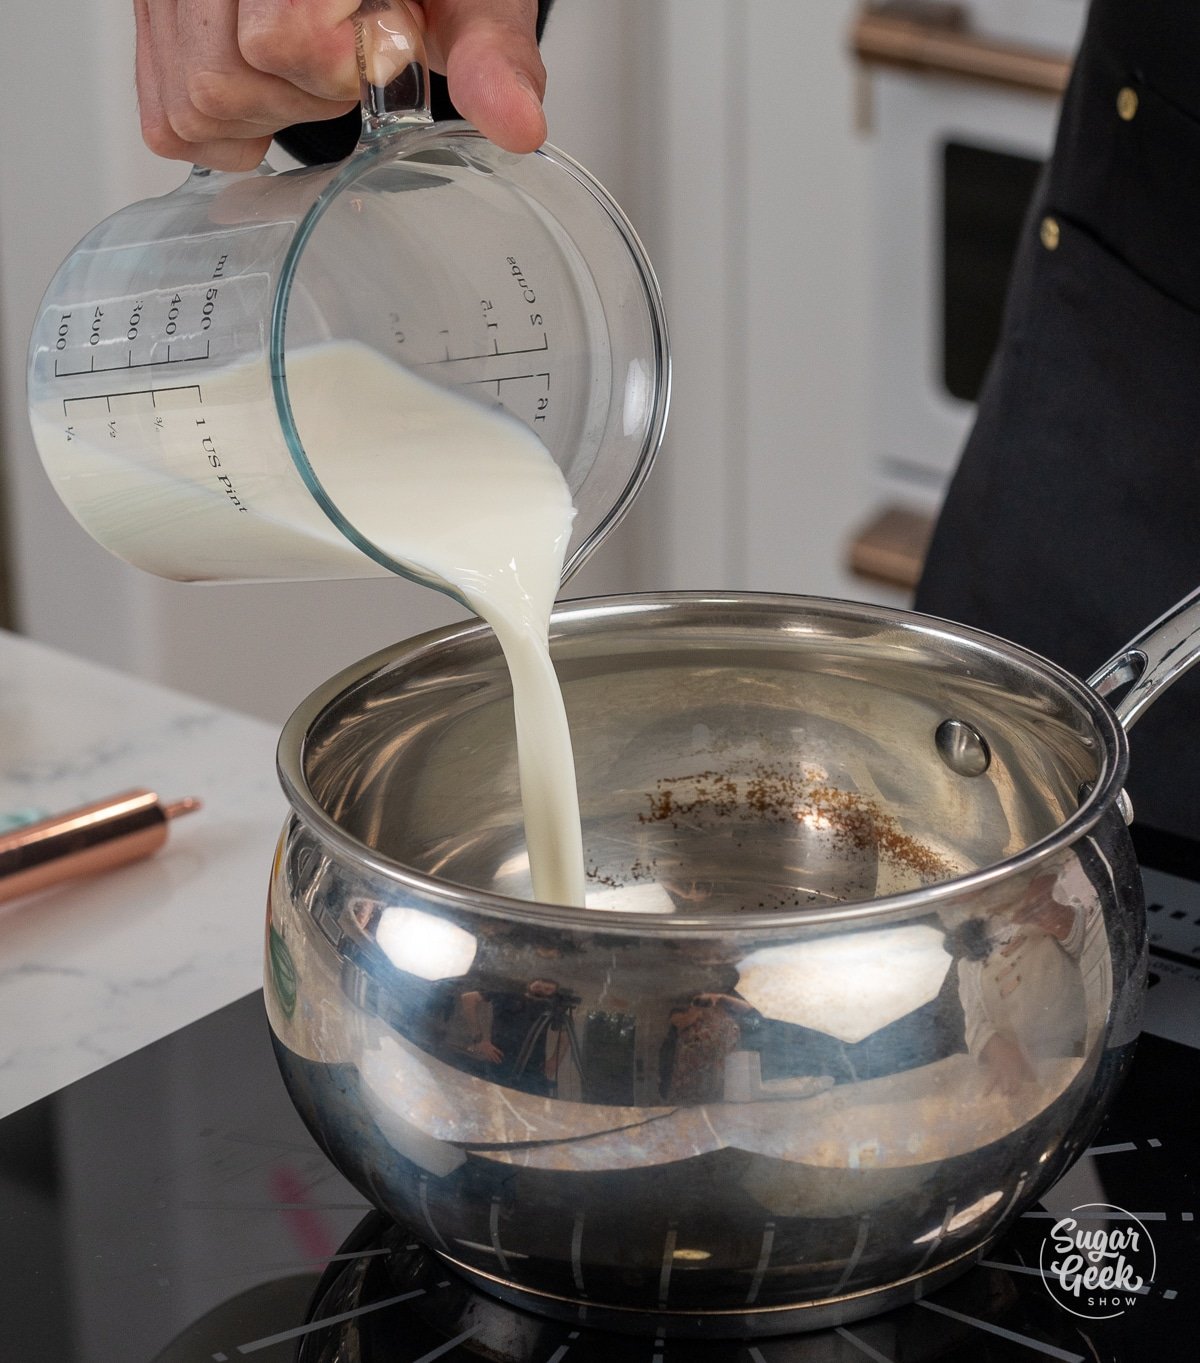 hand adding container of milk into a metal saucepan